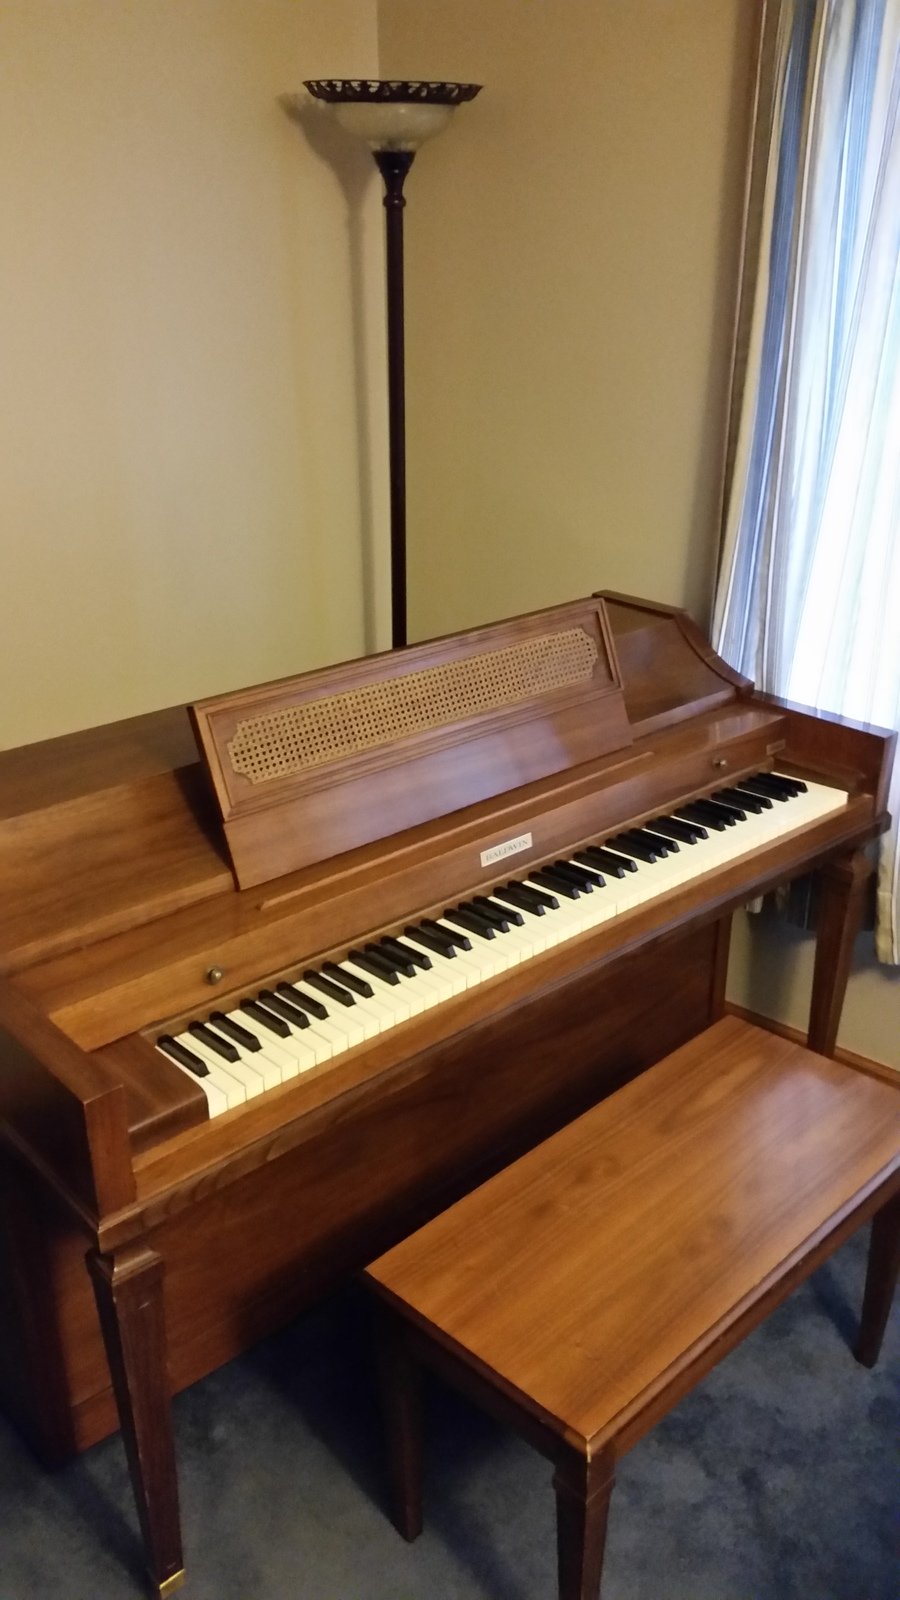 how to find serial numbers of a baby grand baldwin pian